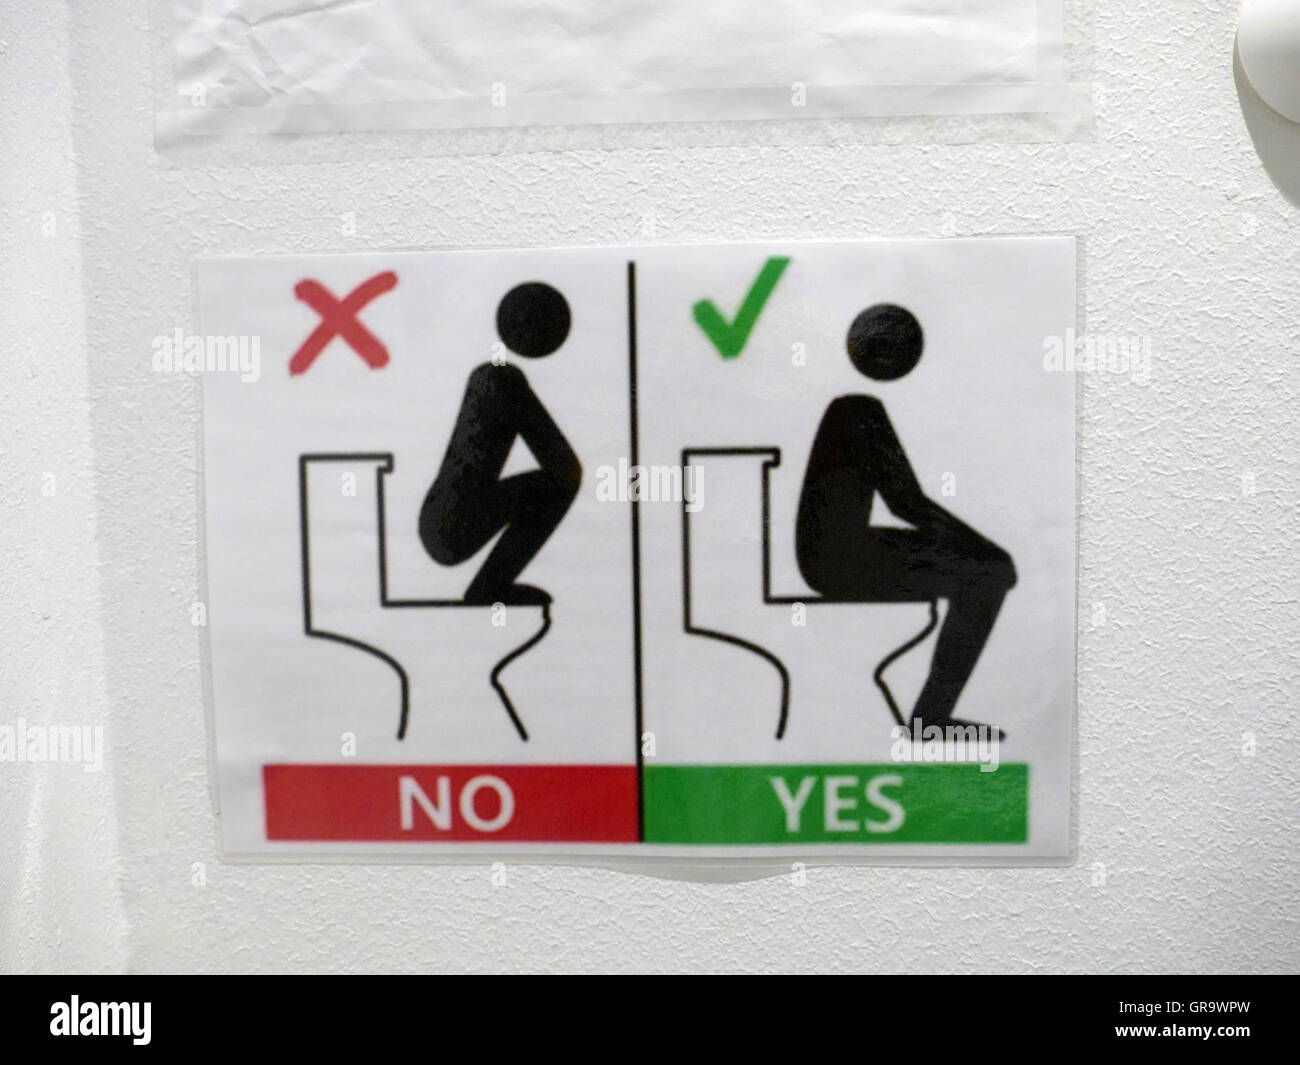 Manner for Toilet in Chinese language Stock Photo